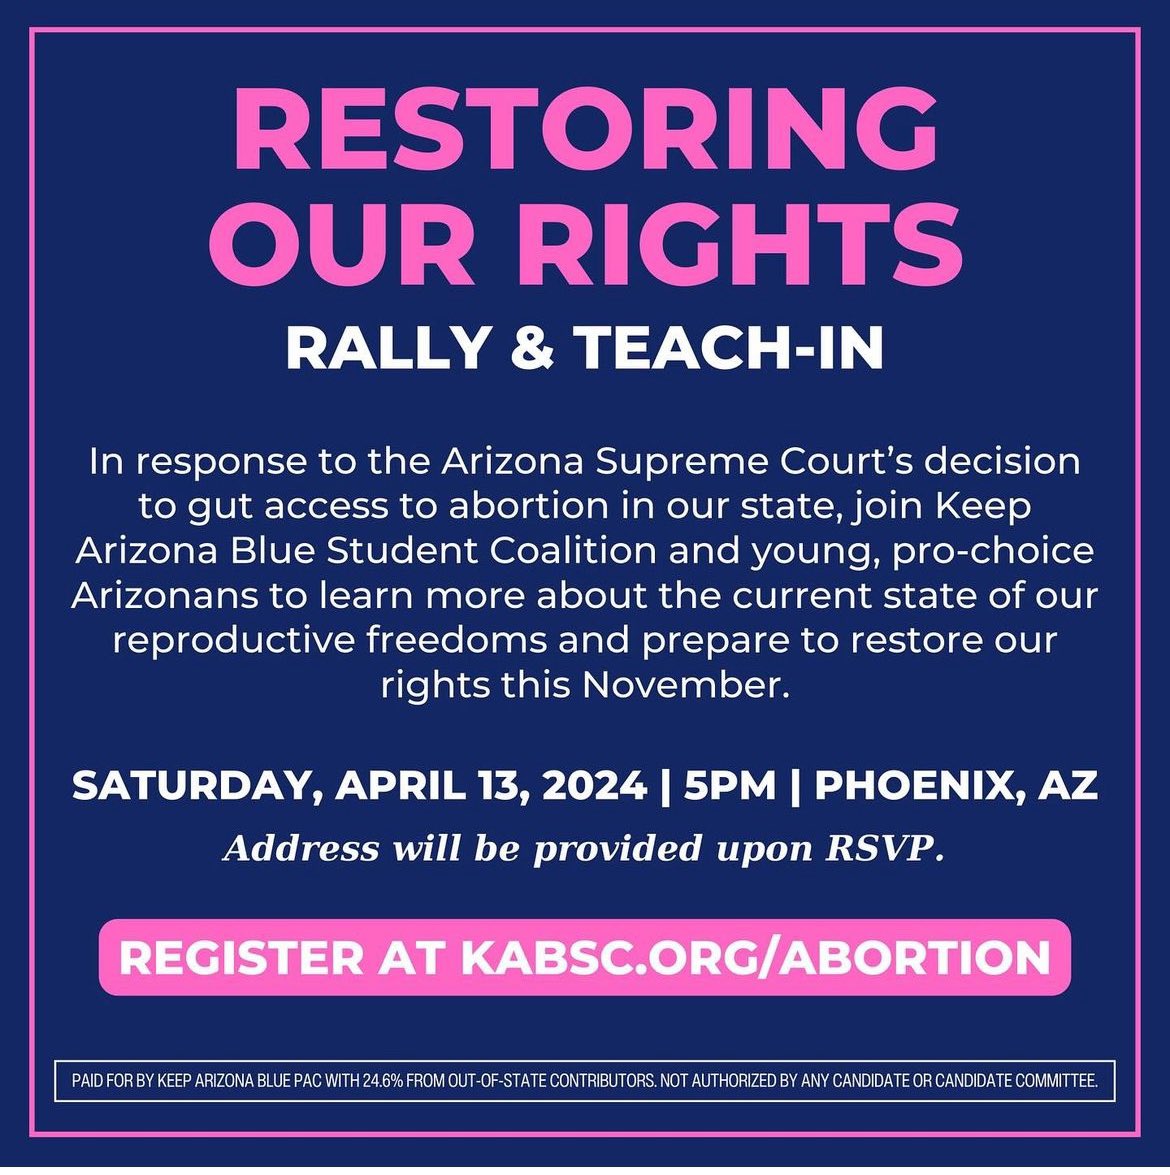 All the protests this weekend in the Phoenix Metro Area to rally against the abortion ban. Saturday 5 pm- Phx Sunday 11 am Rio Vista Park Sunday 4 pm Scottsdale 💙🌊